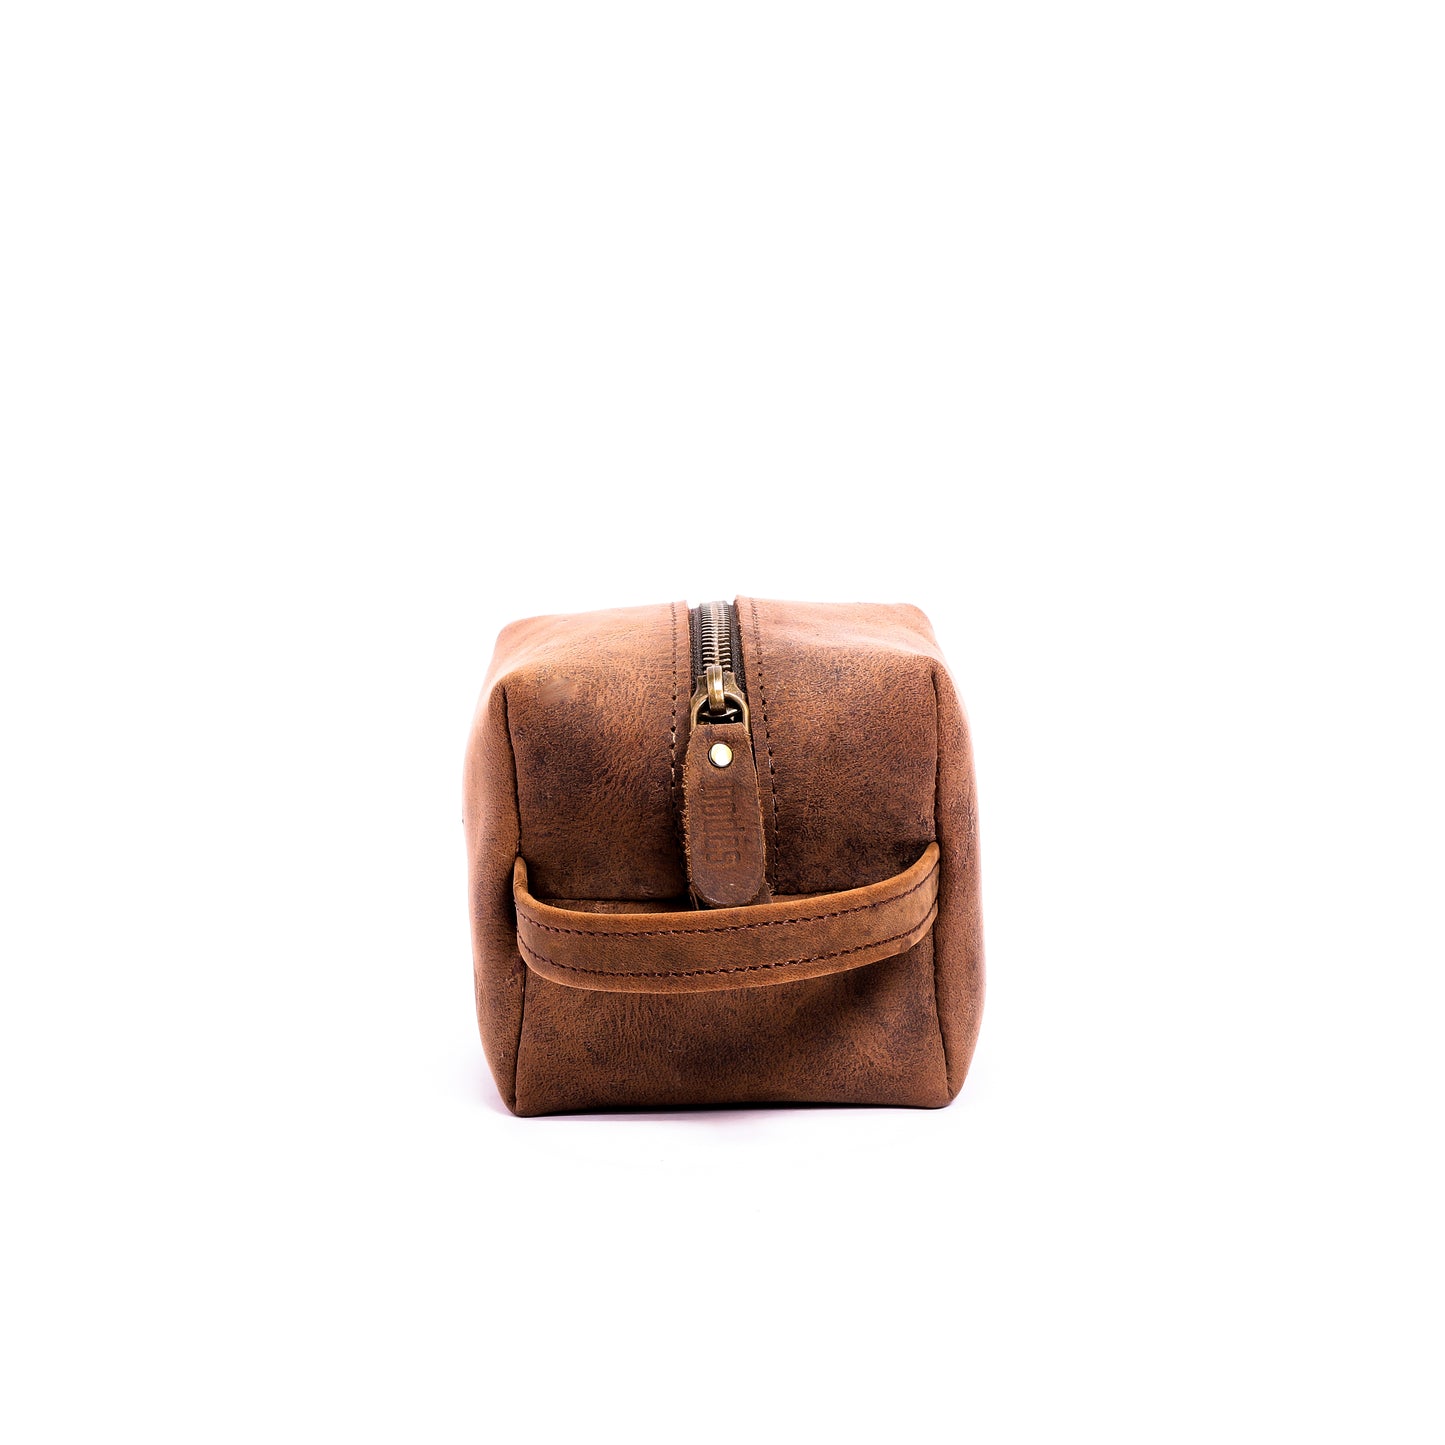 a smallest brown leather toiletry pouch with one big compartment with zipper for travel needs , travel pouch, vanity pouch, leather bag, Genuine leather bag, toiletry pouch.